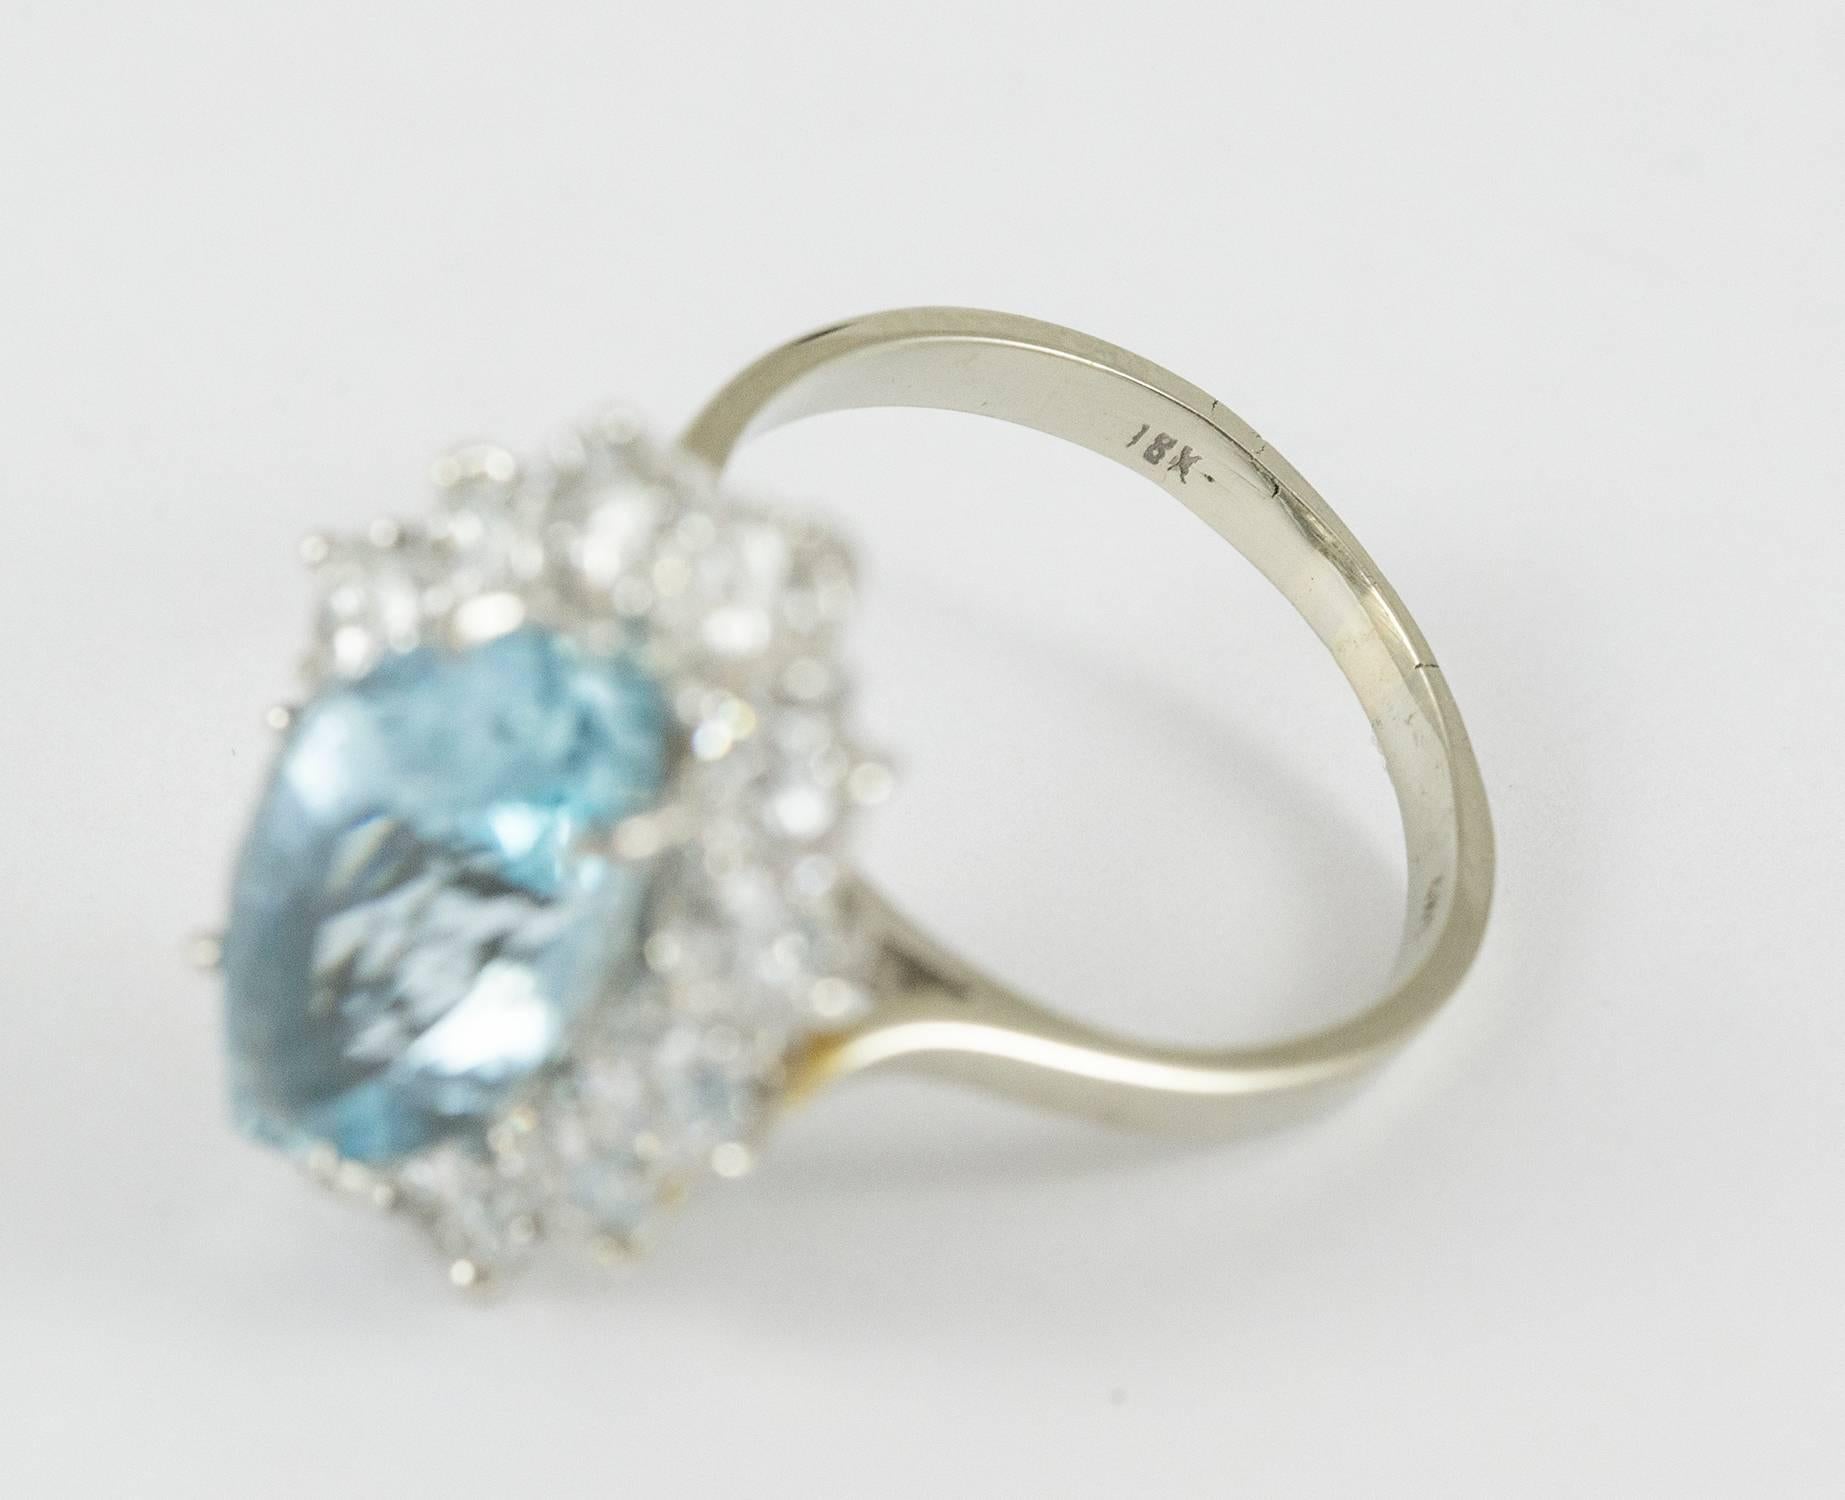 This striking aquamarine ring set in 18k white gold. It holds a bright, strongly coloured marquee cut aquamarine weighing approximately 4 ct. The vibrant aquamarine is framed by twelve brilliant cut diamonds weighting at total of 2.16ct. (F-G-H,